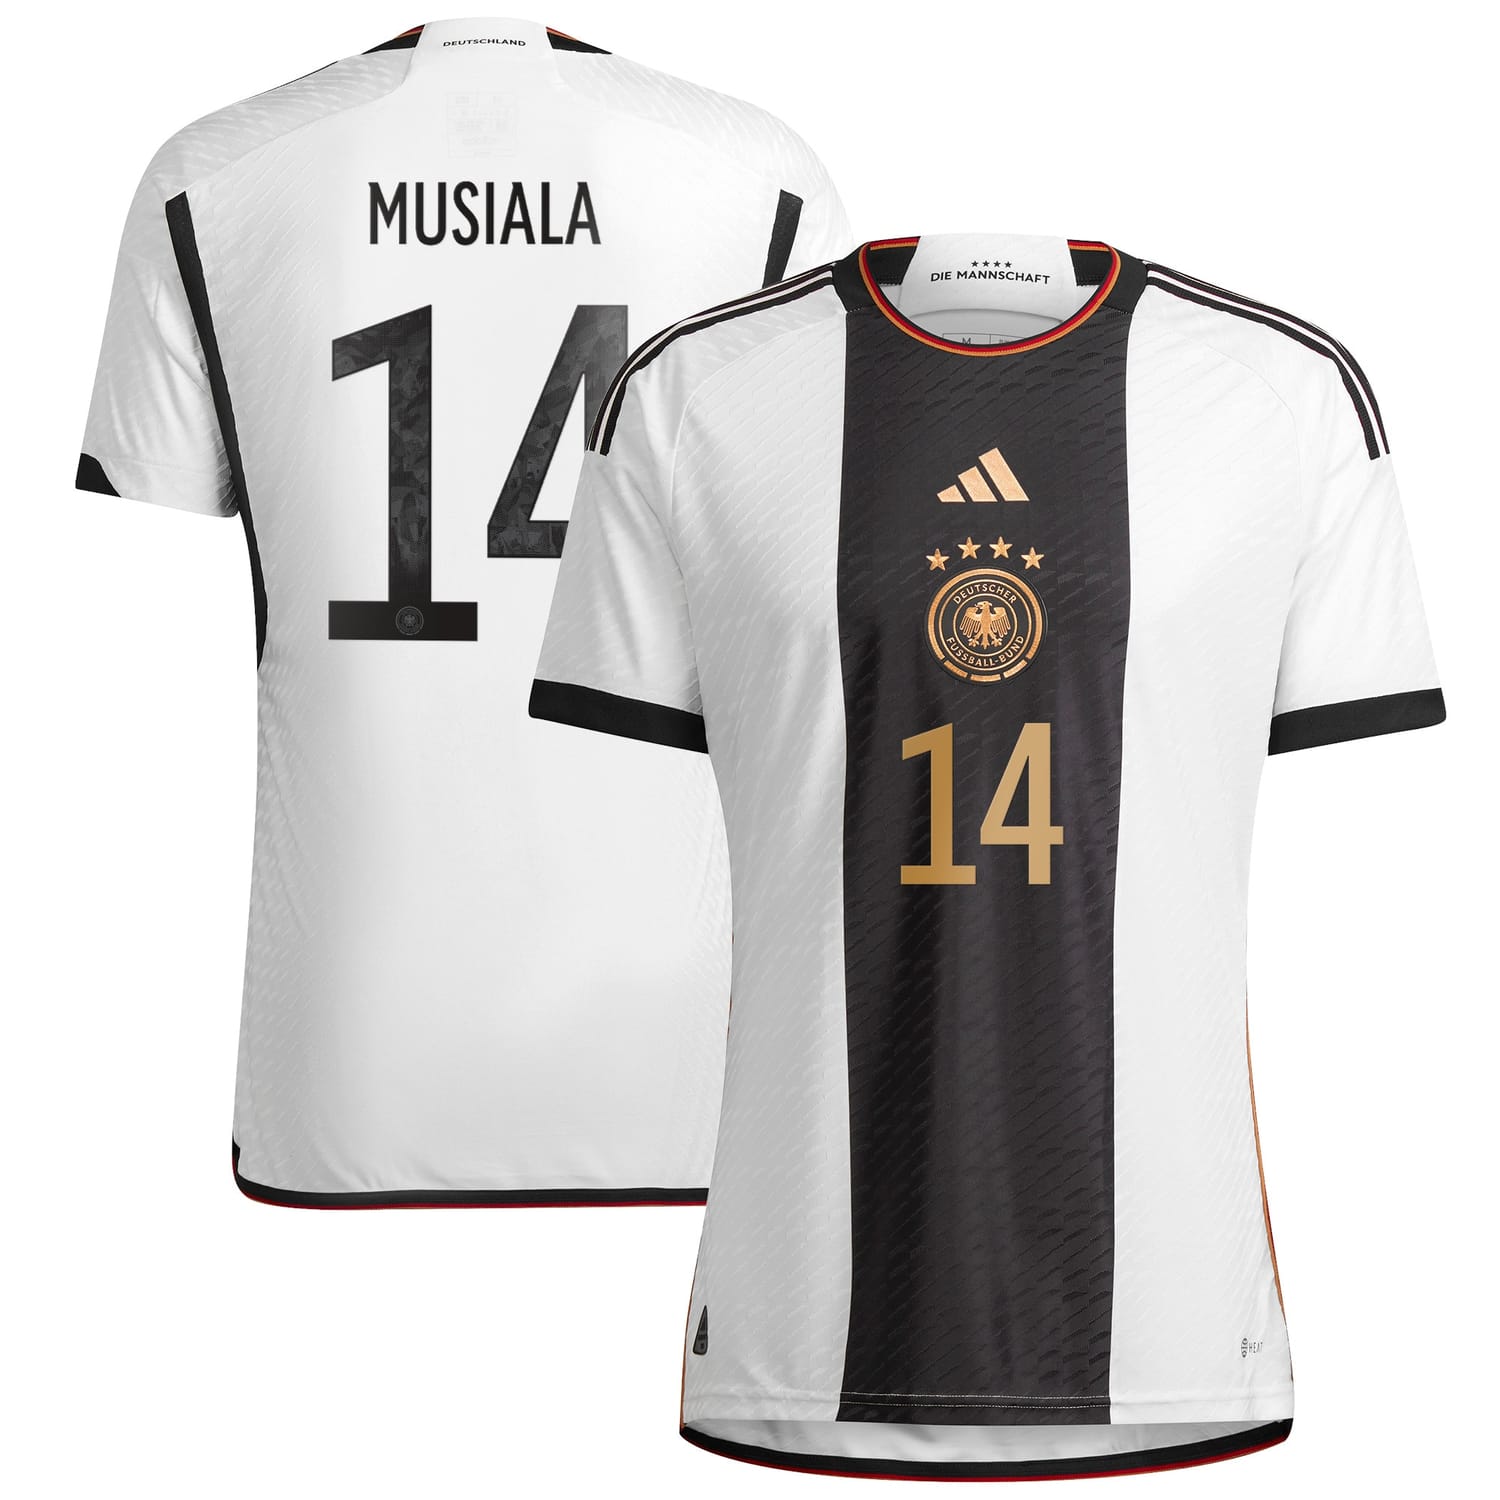 Germany National Team Home Authentic Jersey Shirt player Jamal Musiala 14 printing for Men